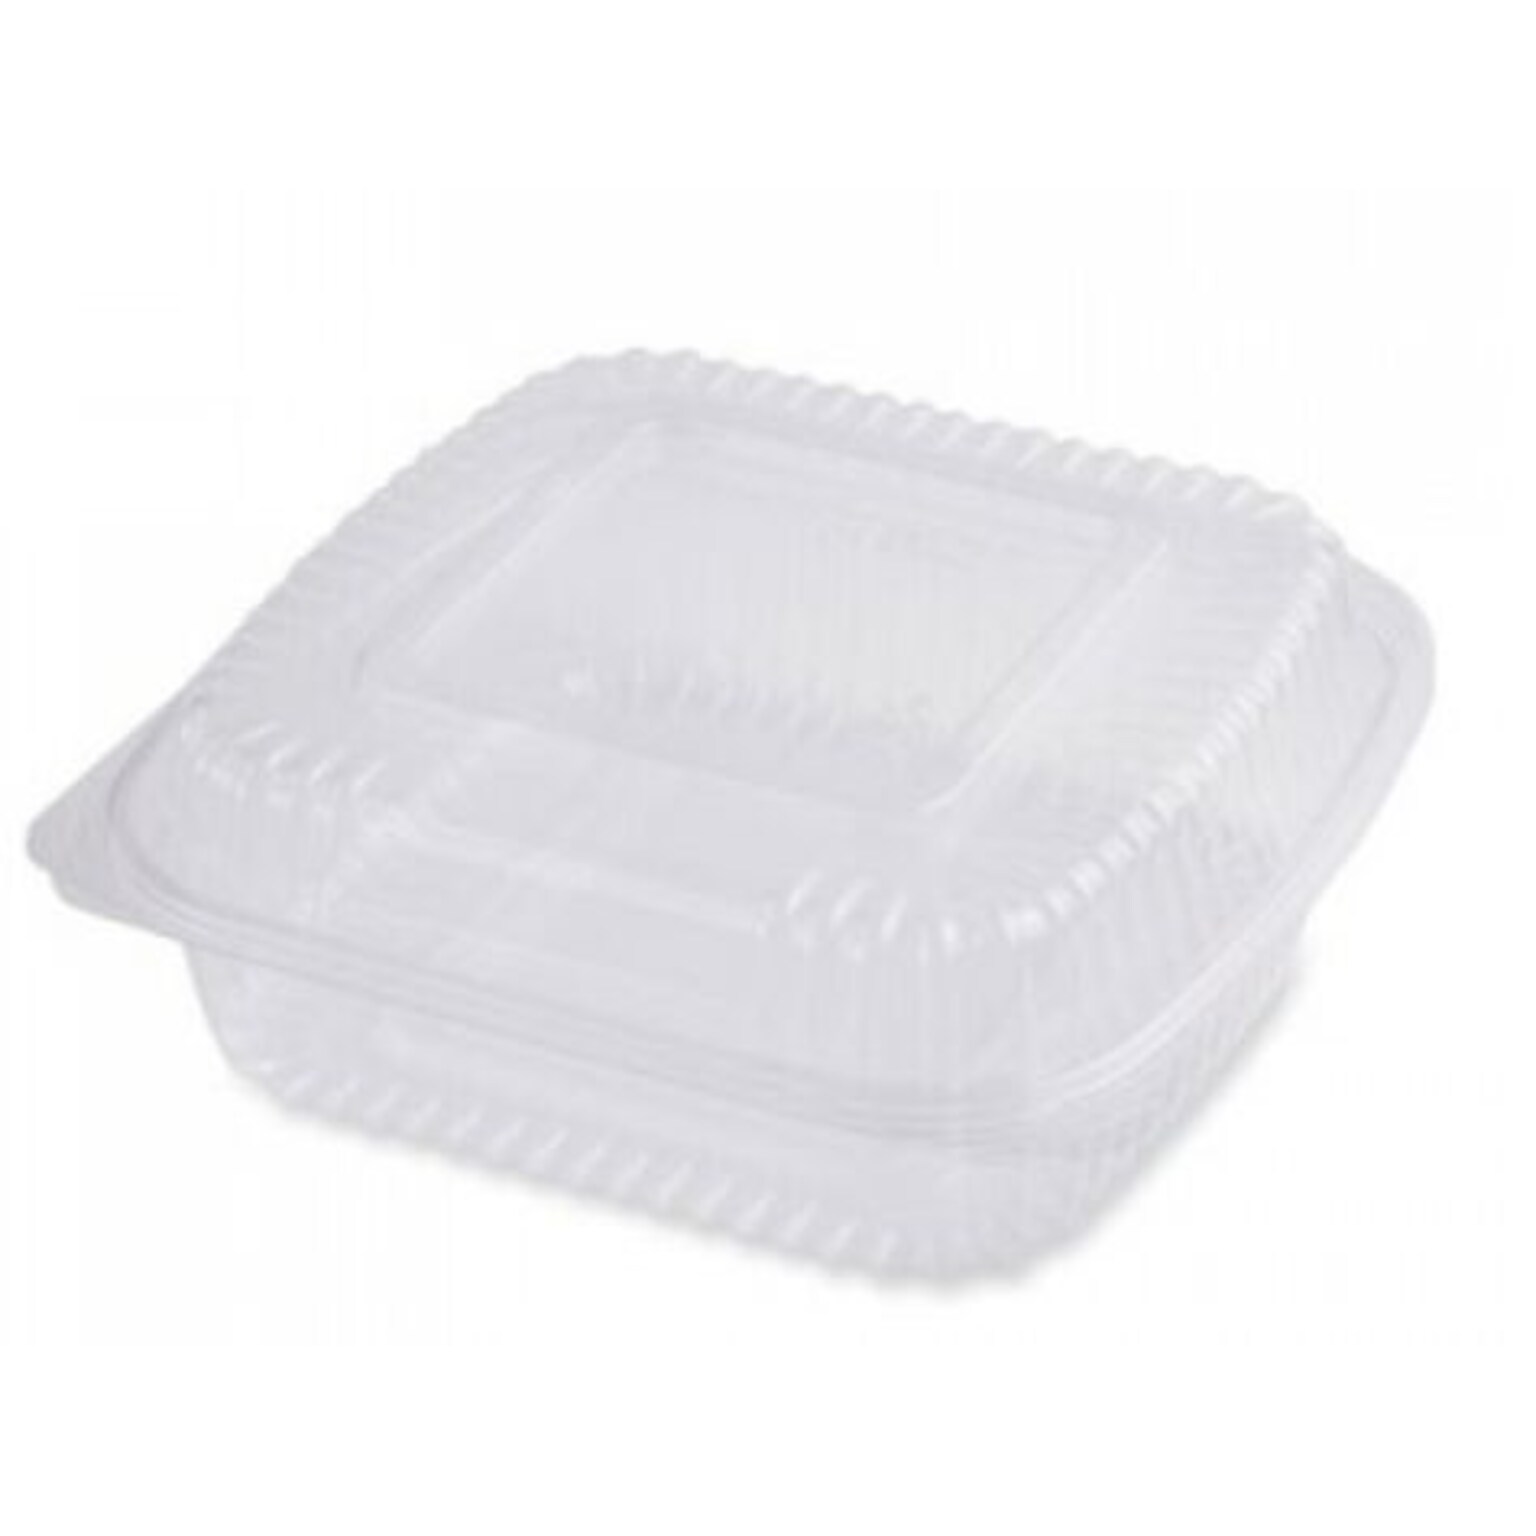 World Centric PLA Hinged Lid Container, Clear, 300/Carton (WORKLCS8N)